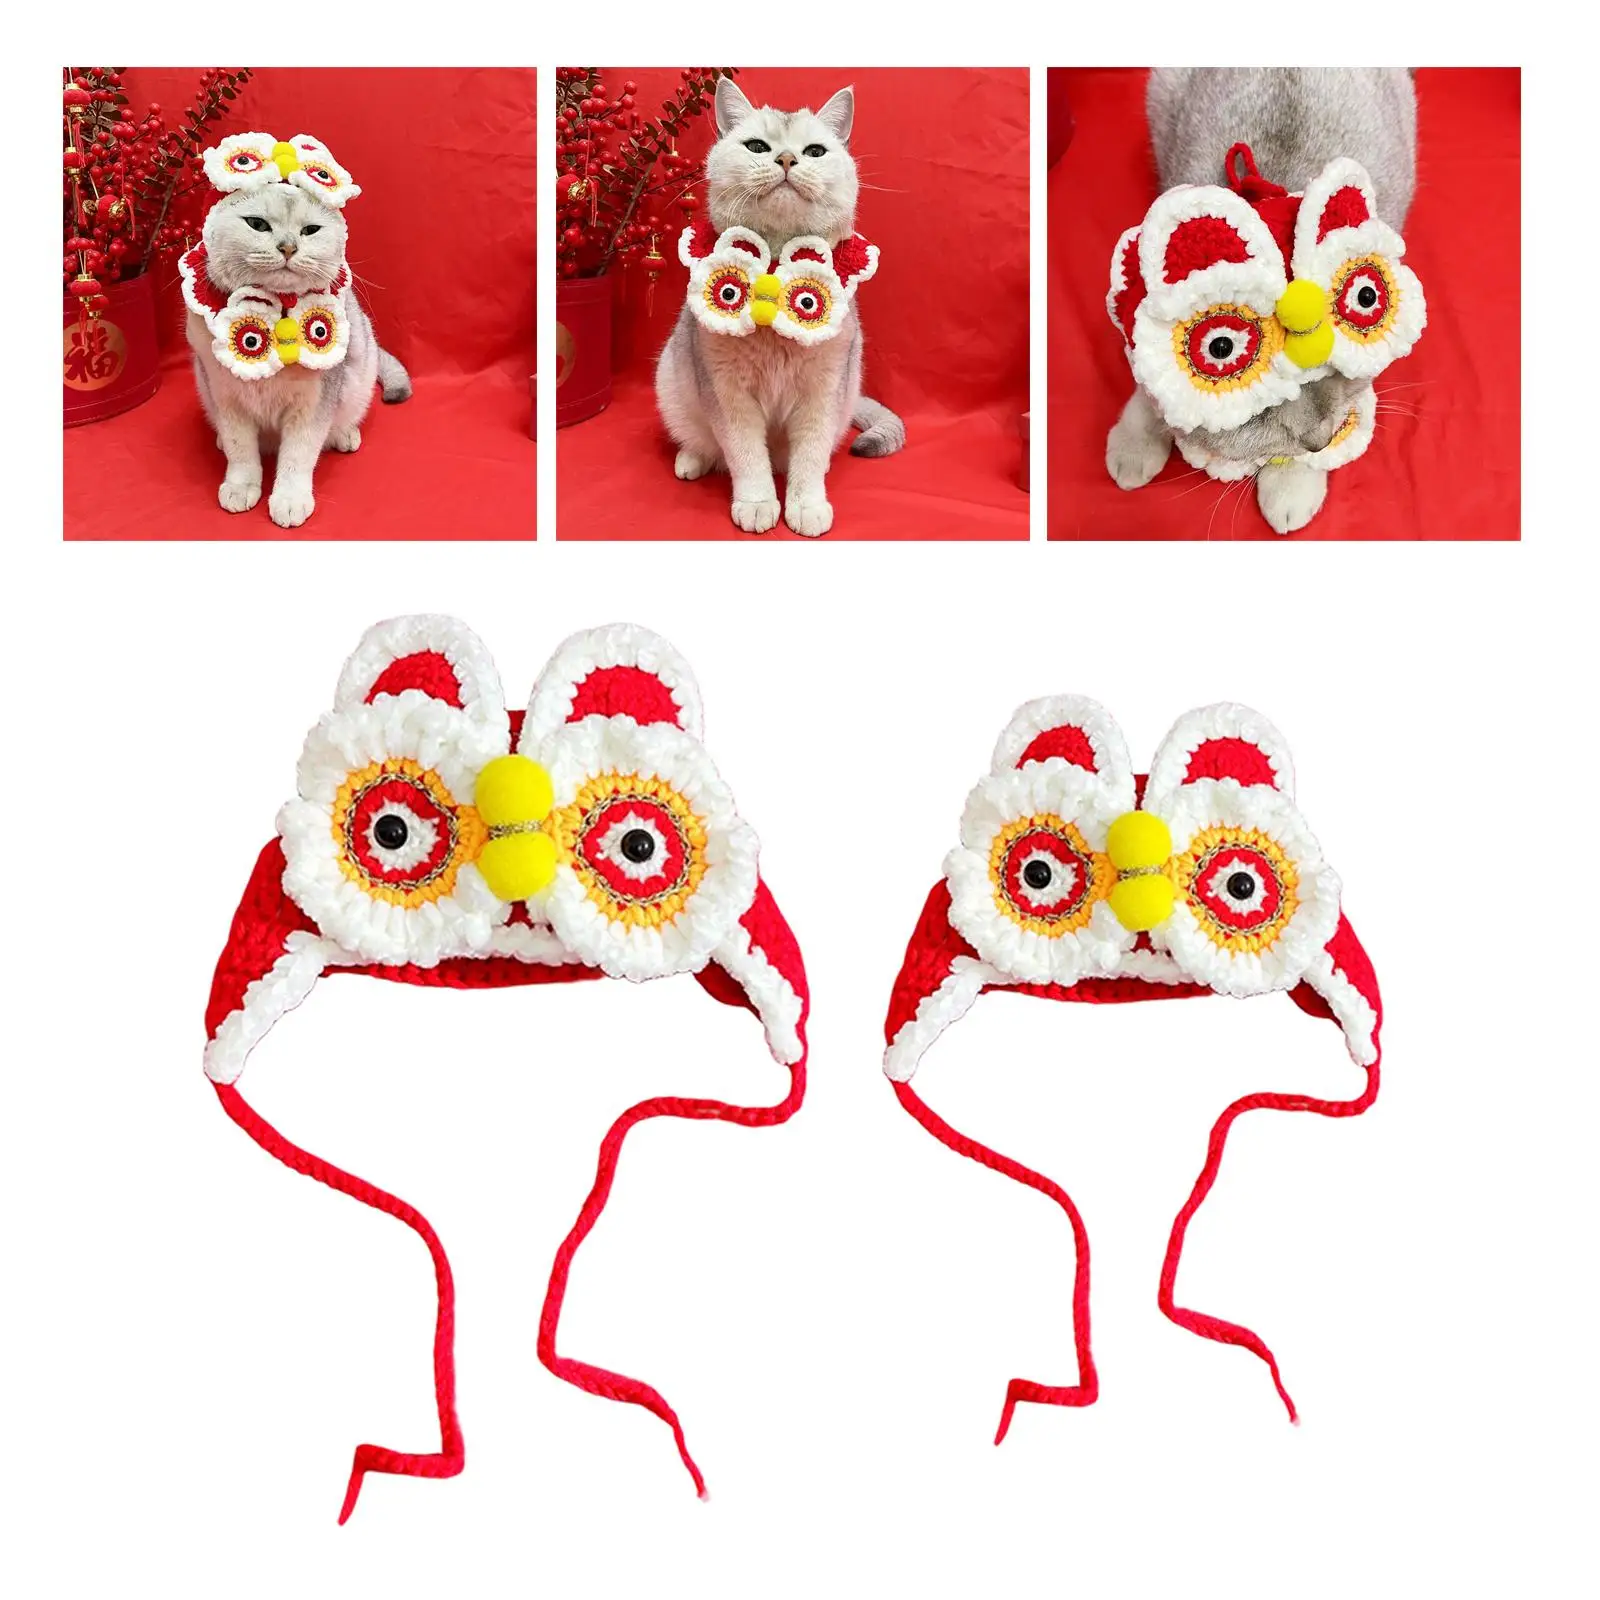 Soft Pet Hat Knitting Decor Head Cover Adjustable Clothing Supplies Accessories Winter Warm Chinese Costume for Kitten Dogs Cats